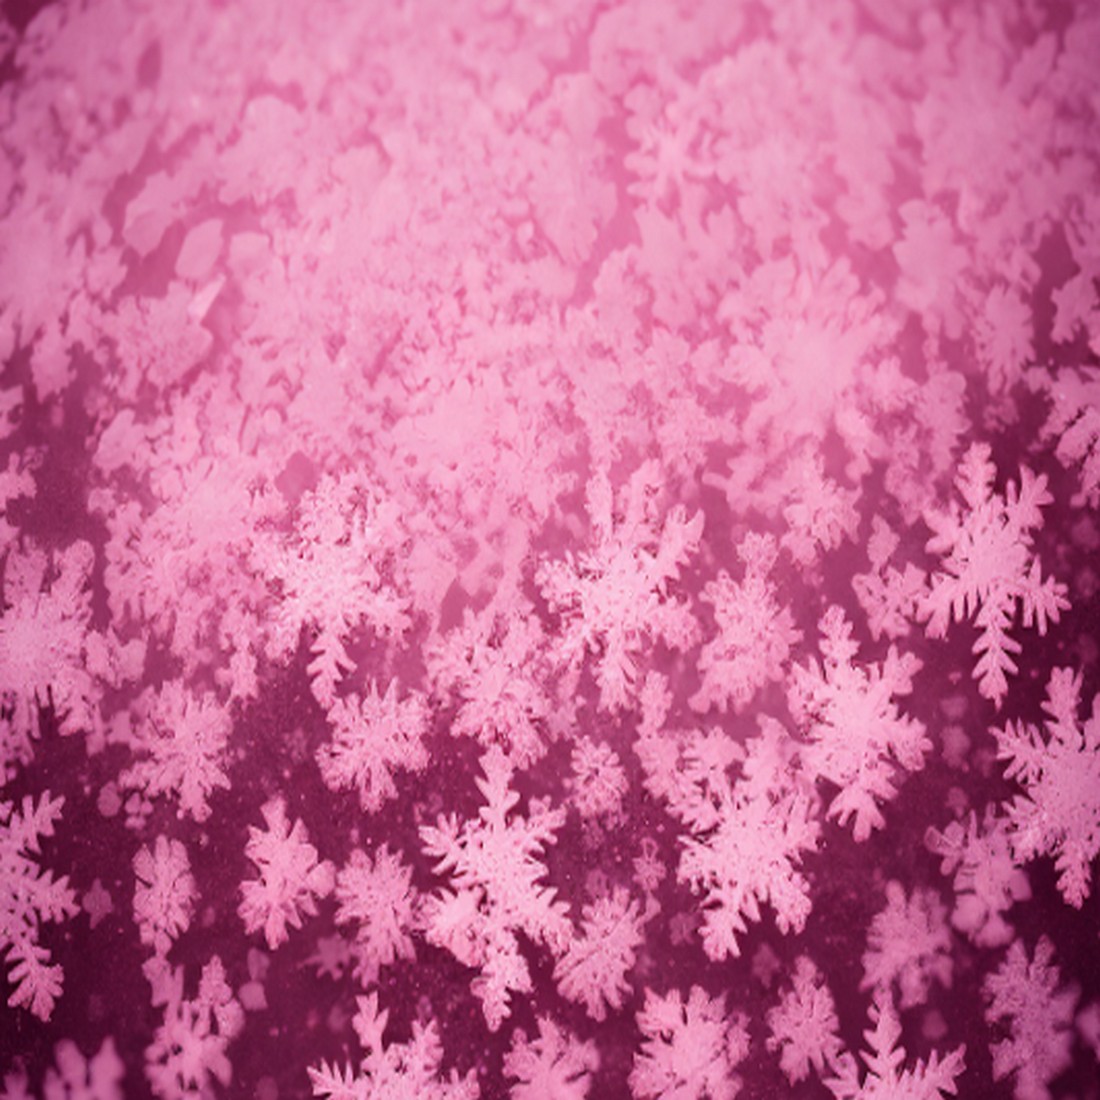 pink snow flakes background texture1 126